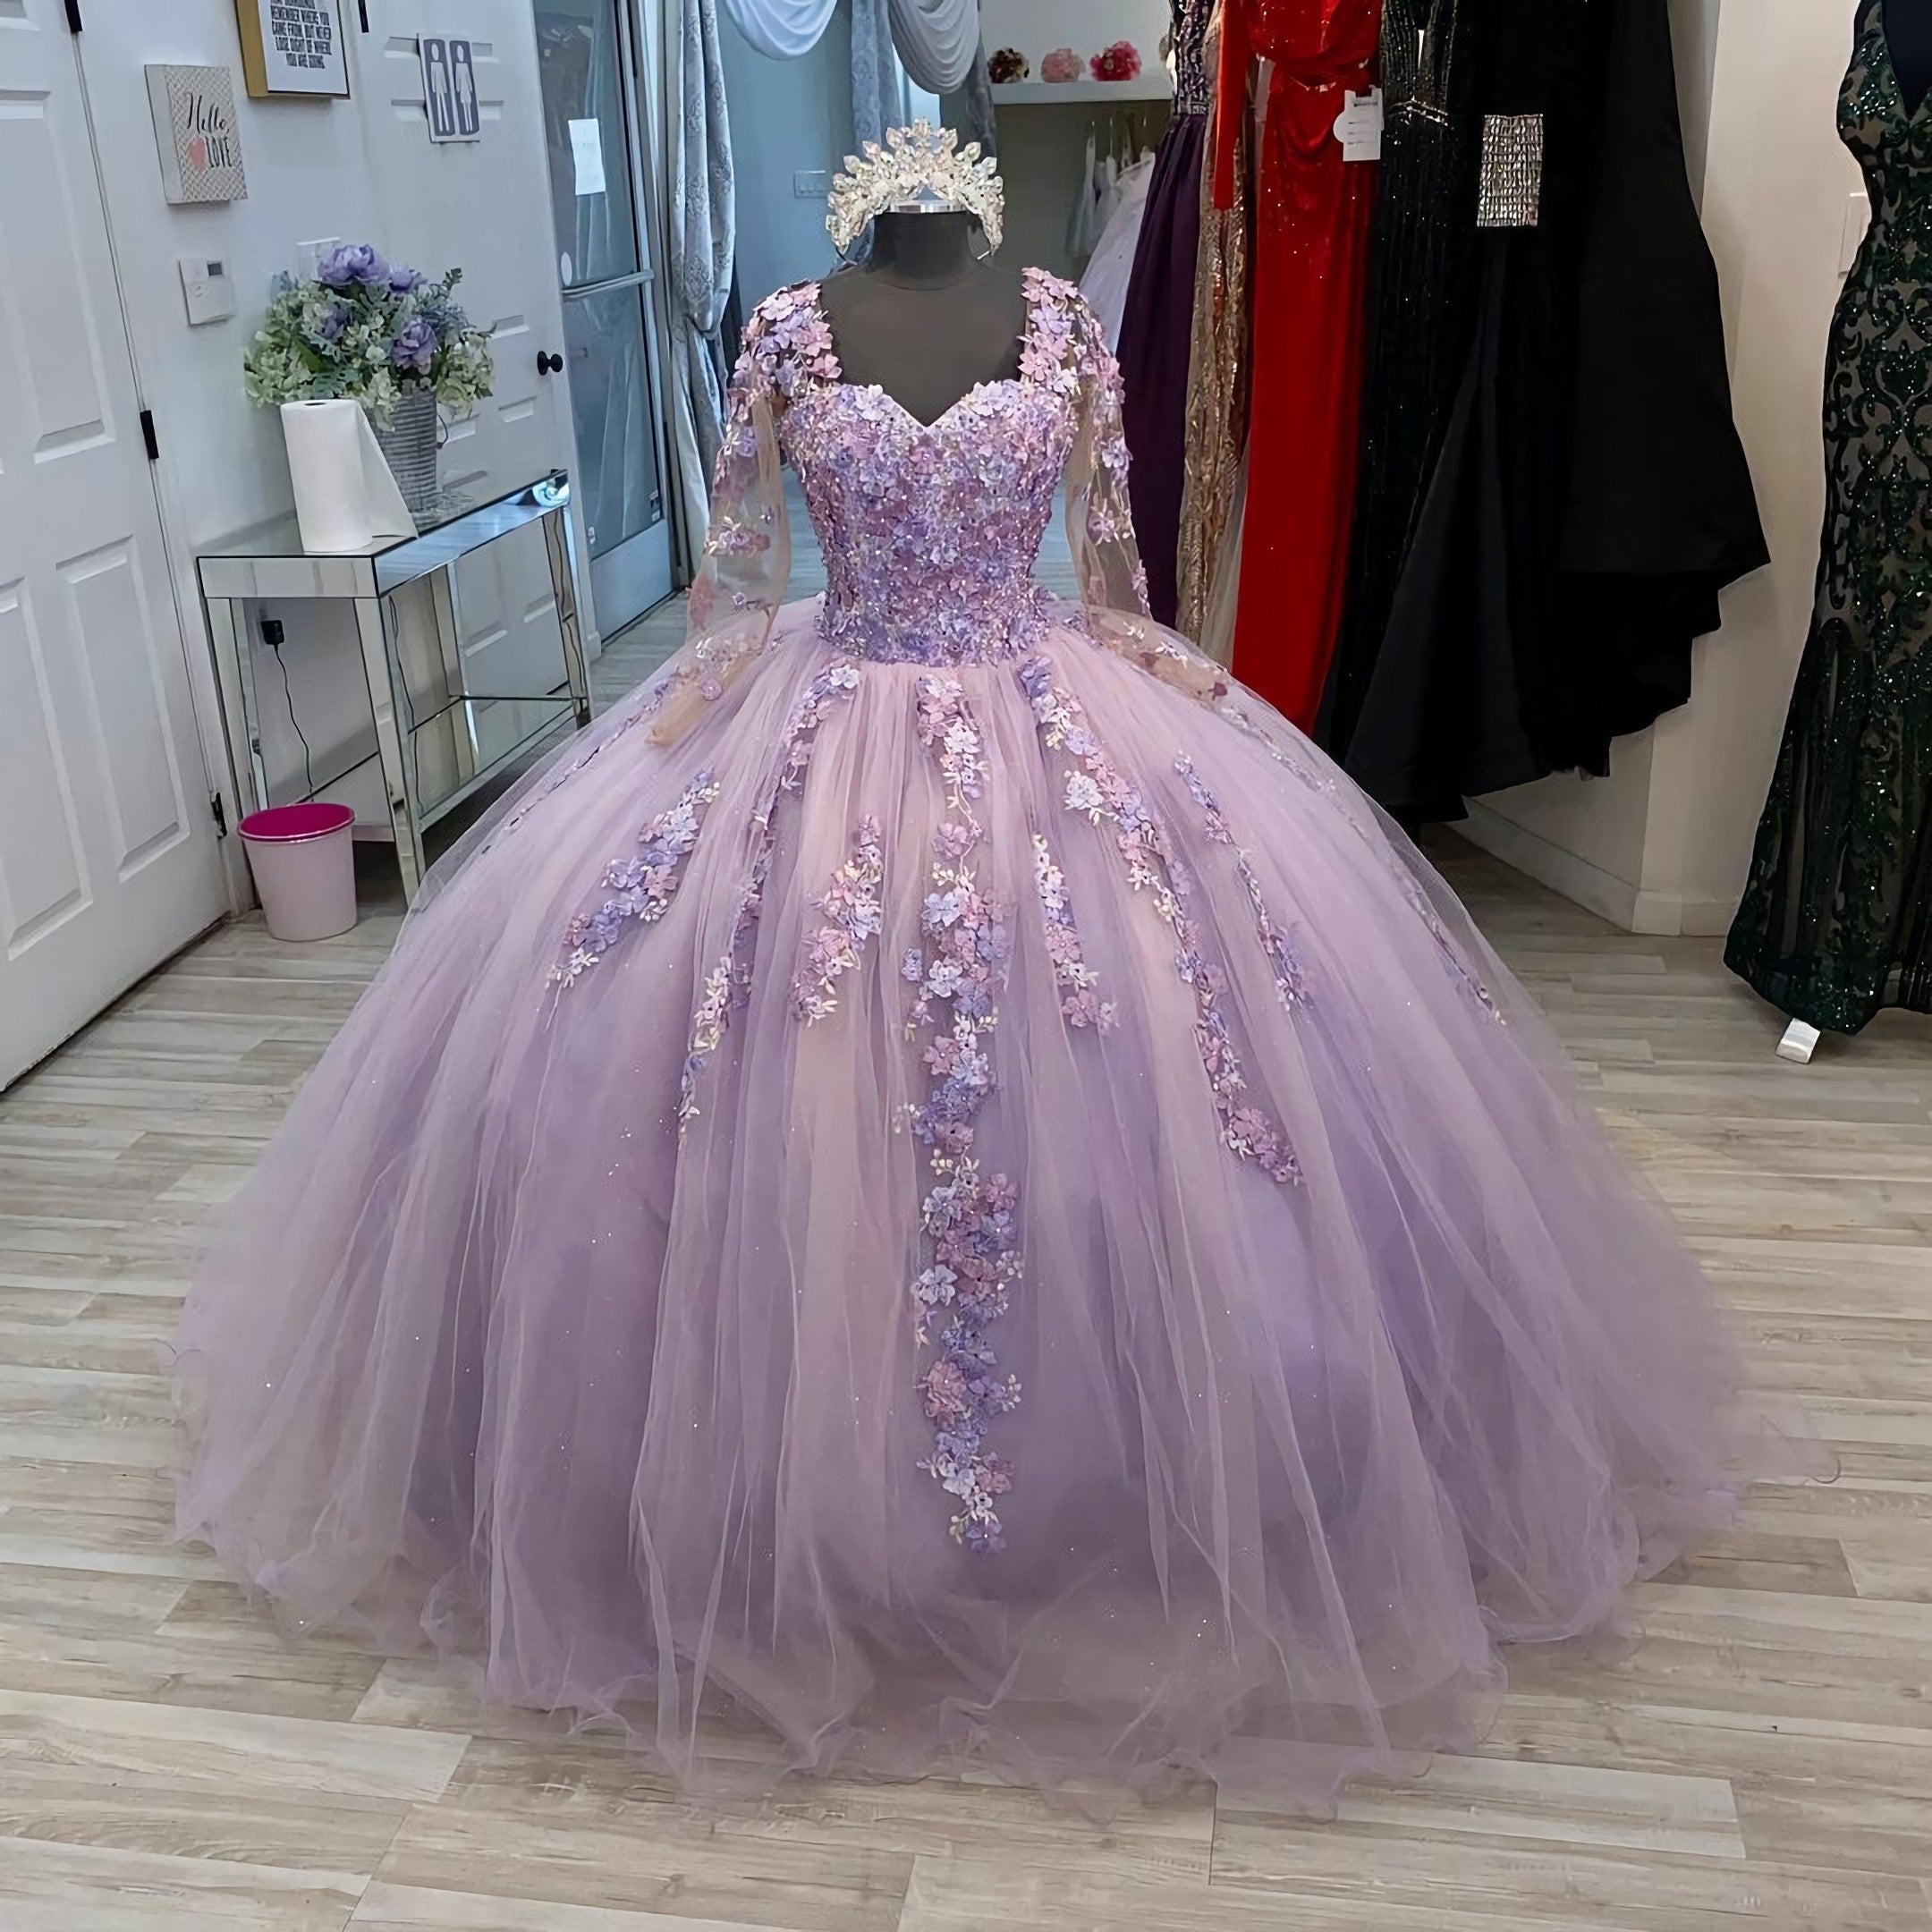 Prom Dress Fabric, Lavender Prom Ball Gown